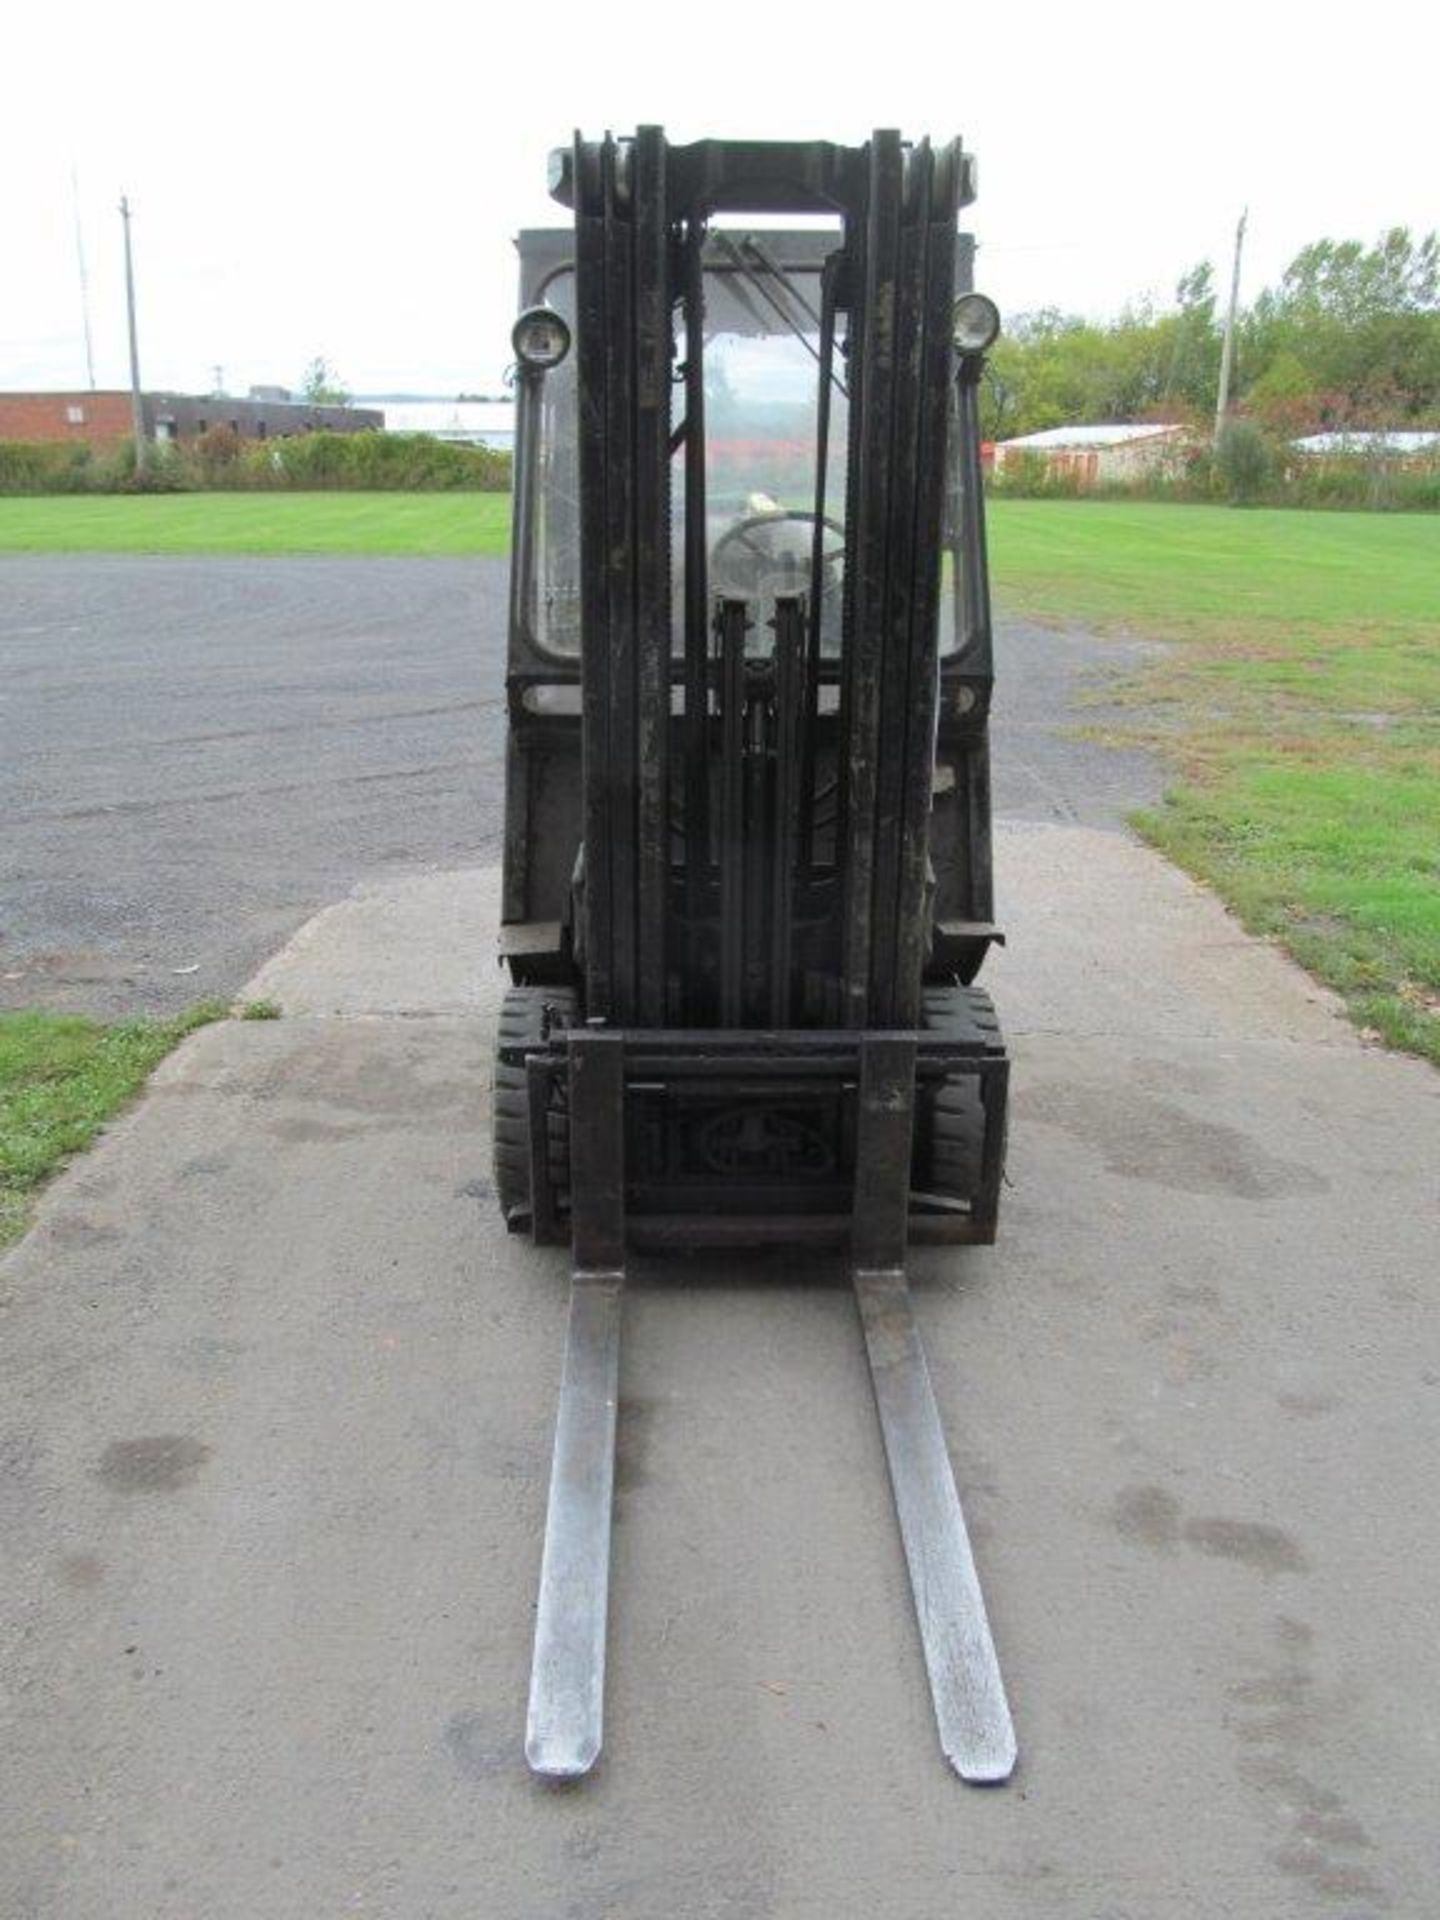 YALE PROPANE FORKLIFT MODEL: E466087, 5000 LBS CAP, INDOOR/OUTDOOR, "PROPANE TANK NOT INCLUDED" - Image 7 of 10